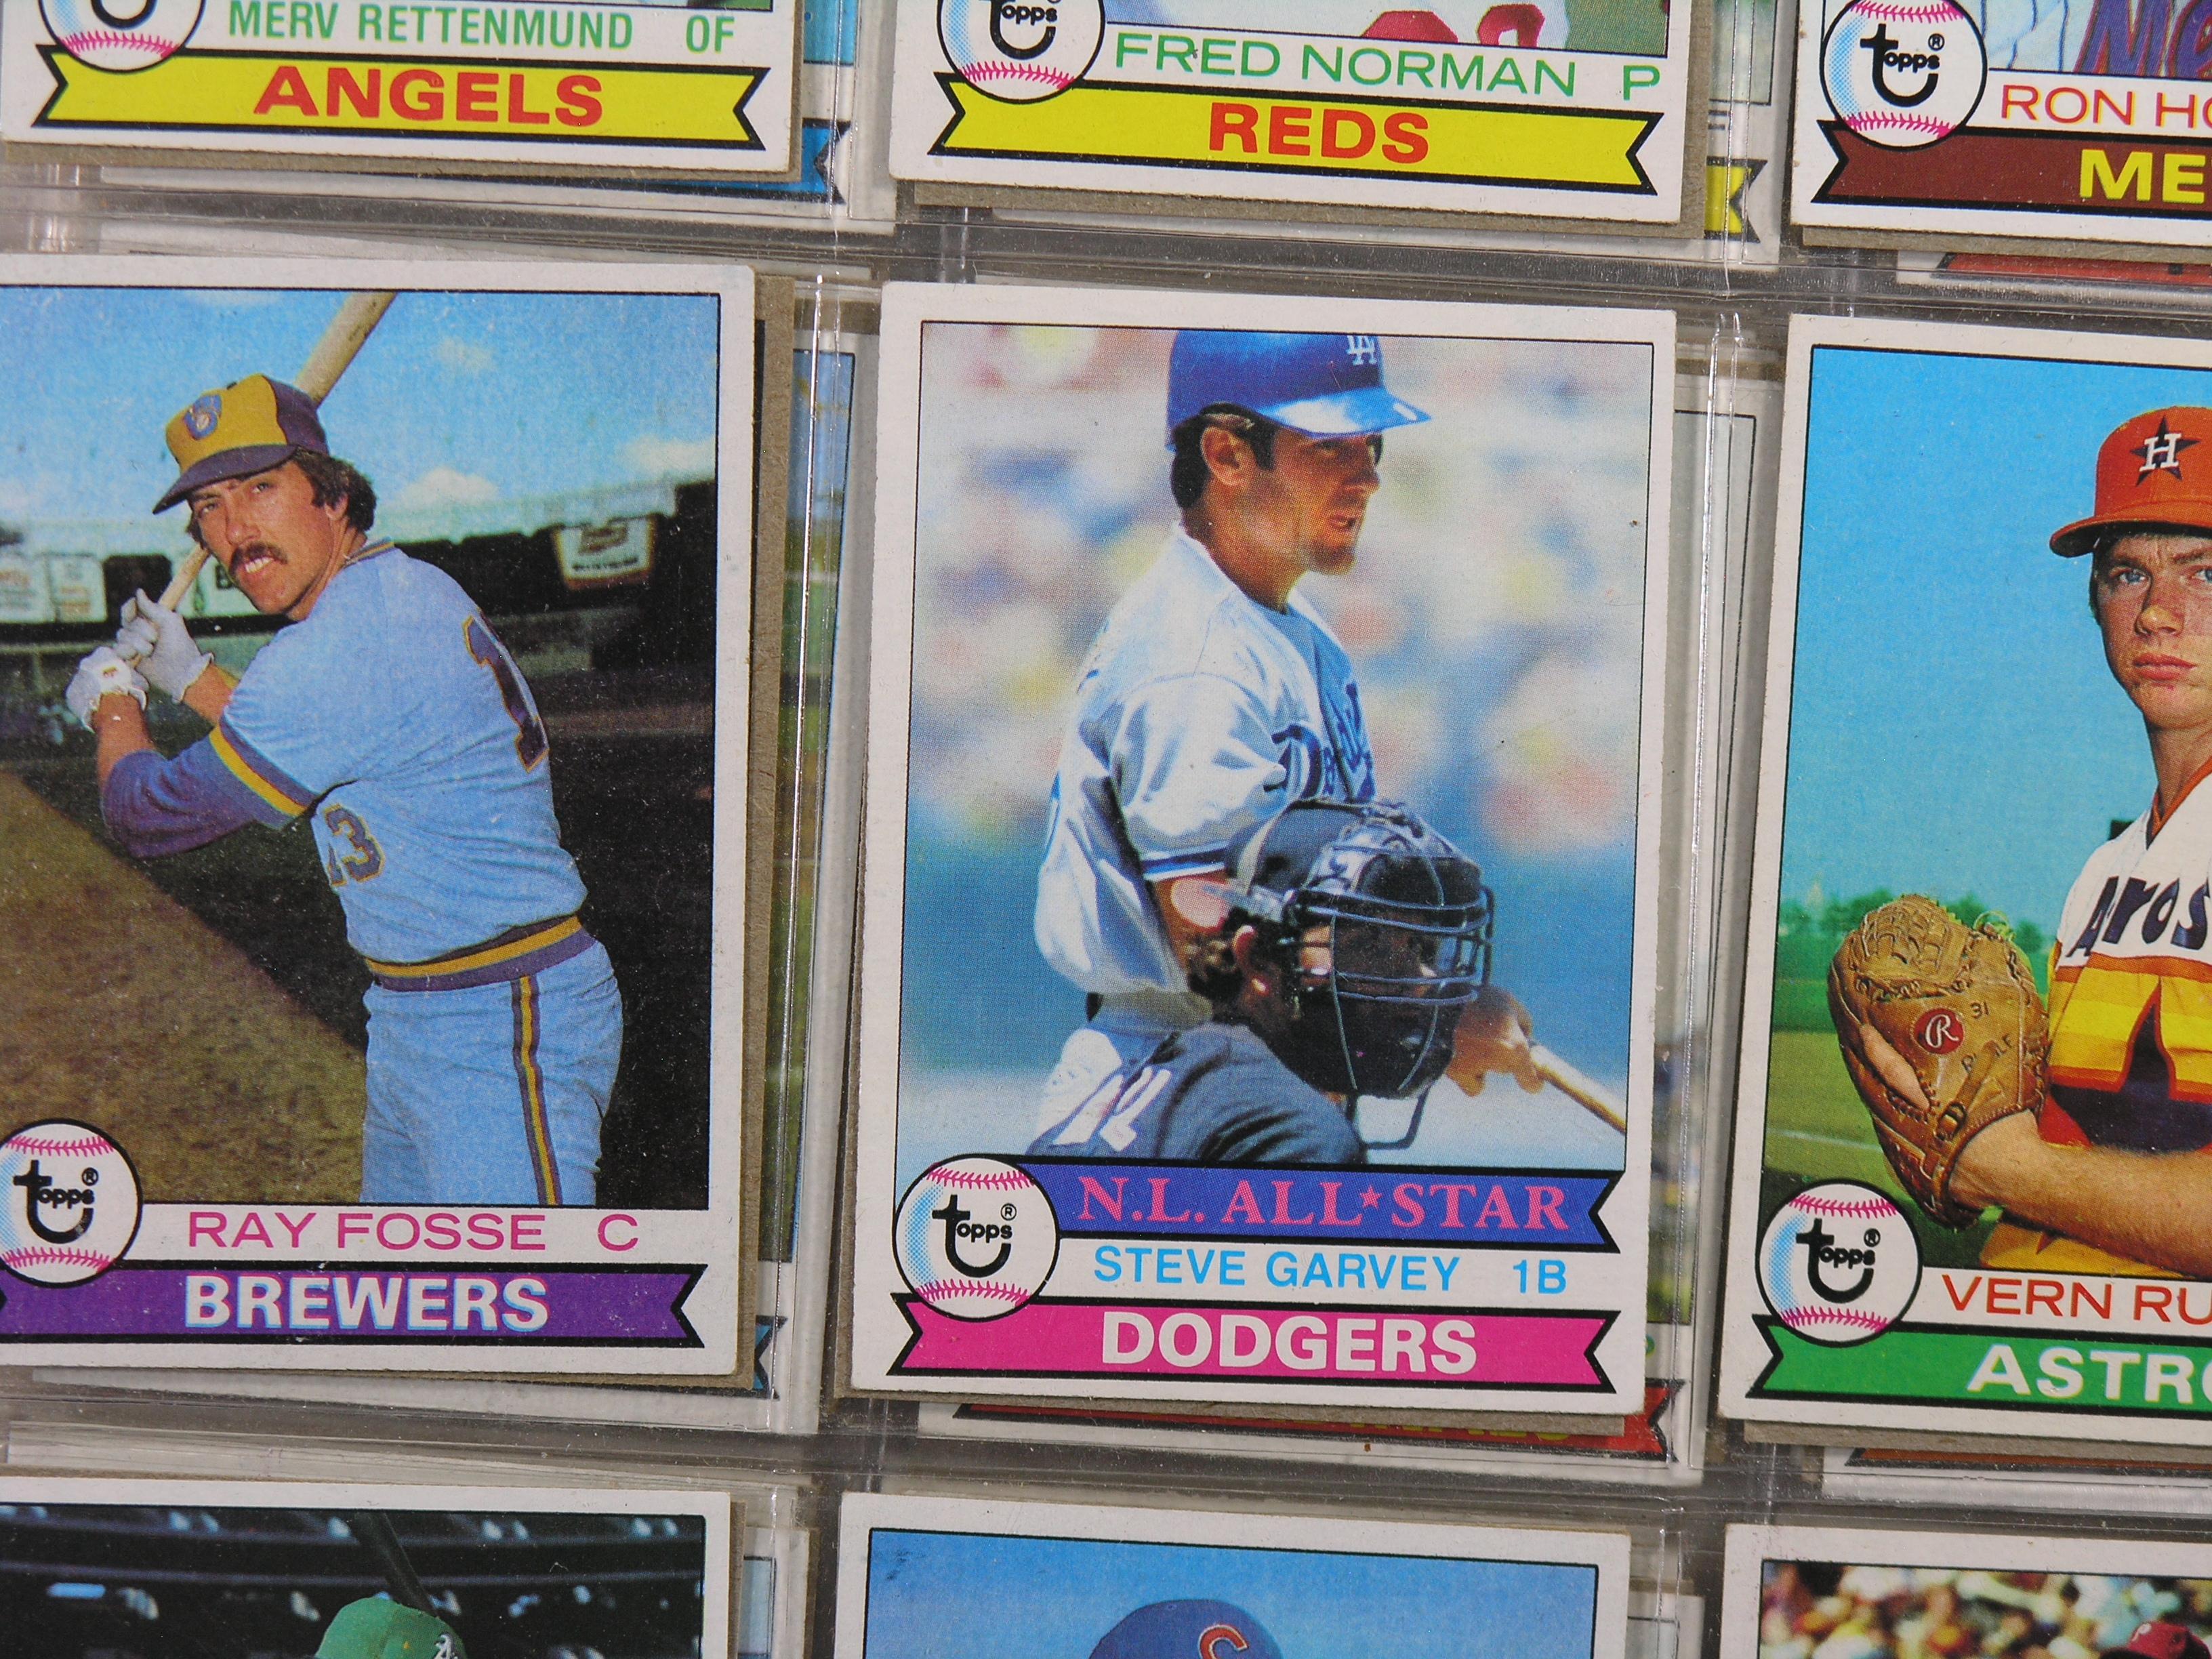 1979 Topps Baseball Card Complete Set. Includes Rookie Ozzie Smith and Many